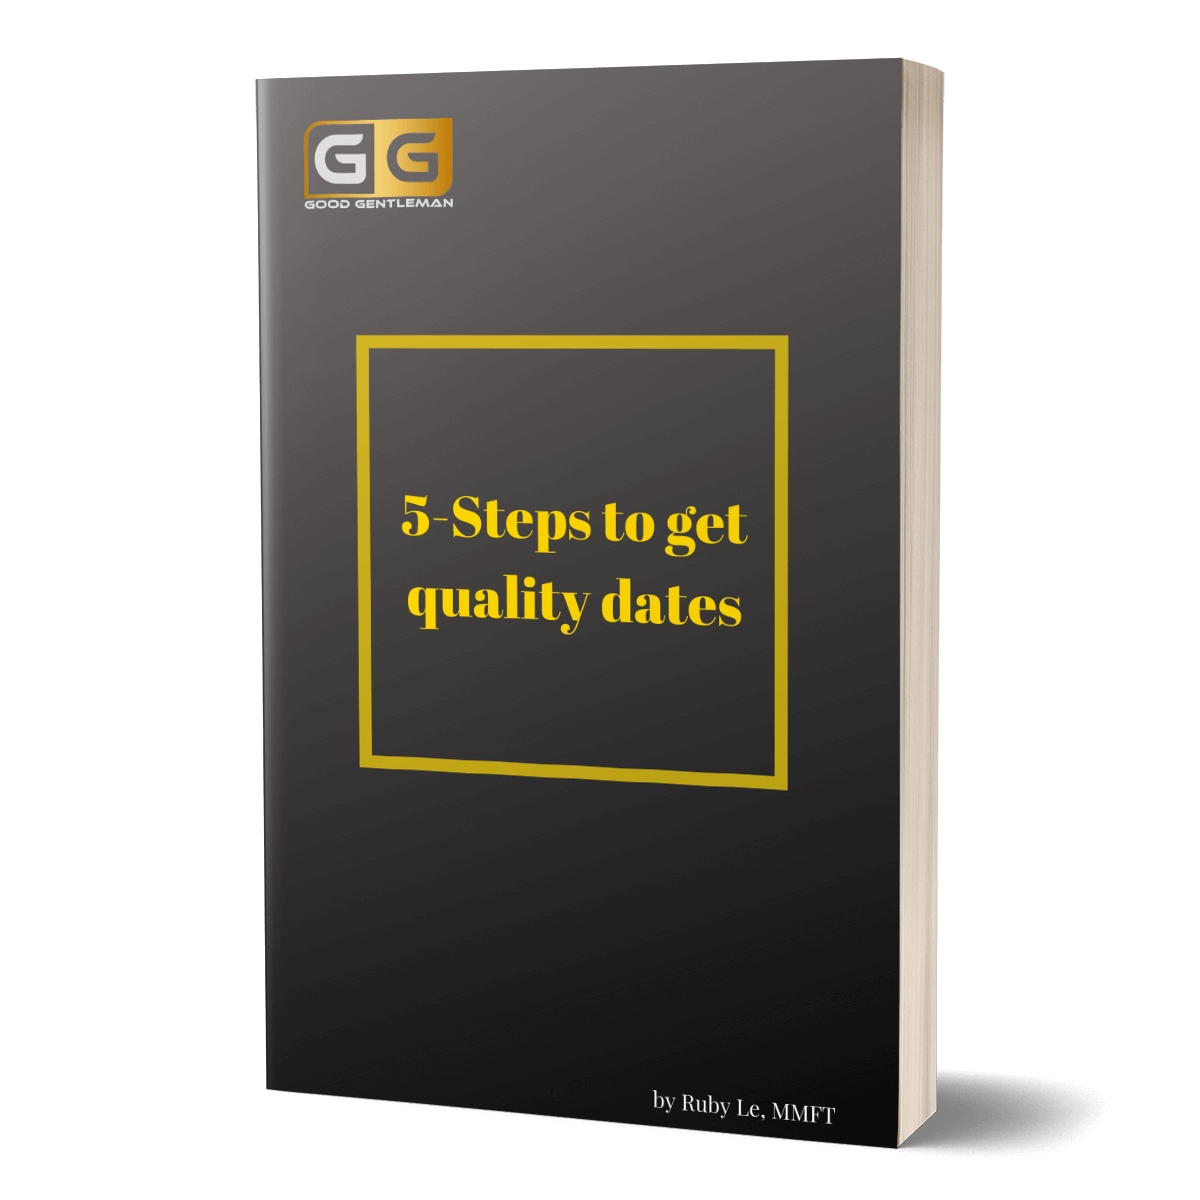 5-Steps to Get Quality Dates